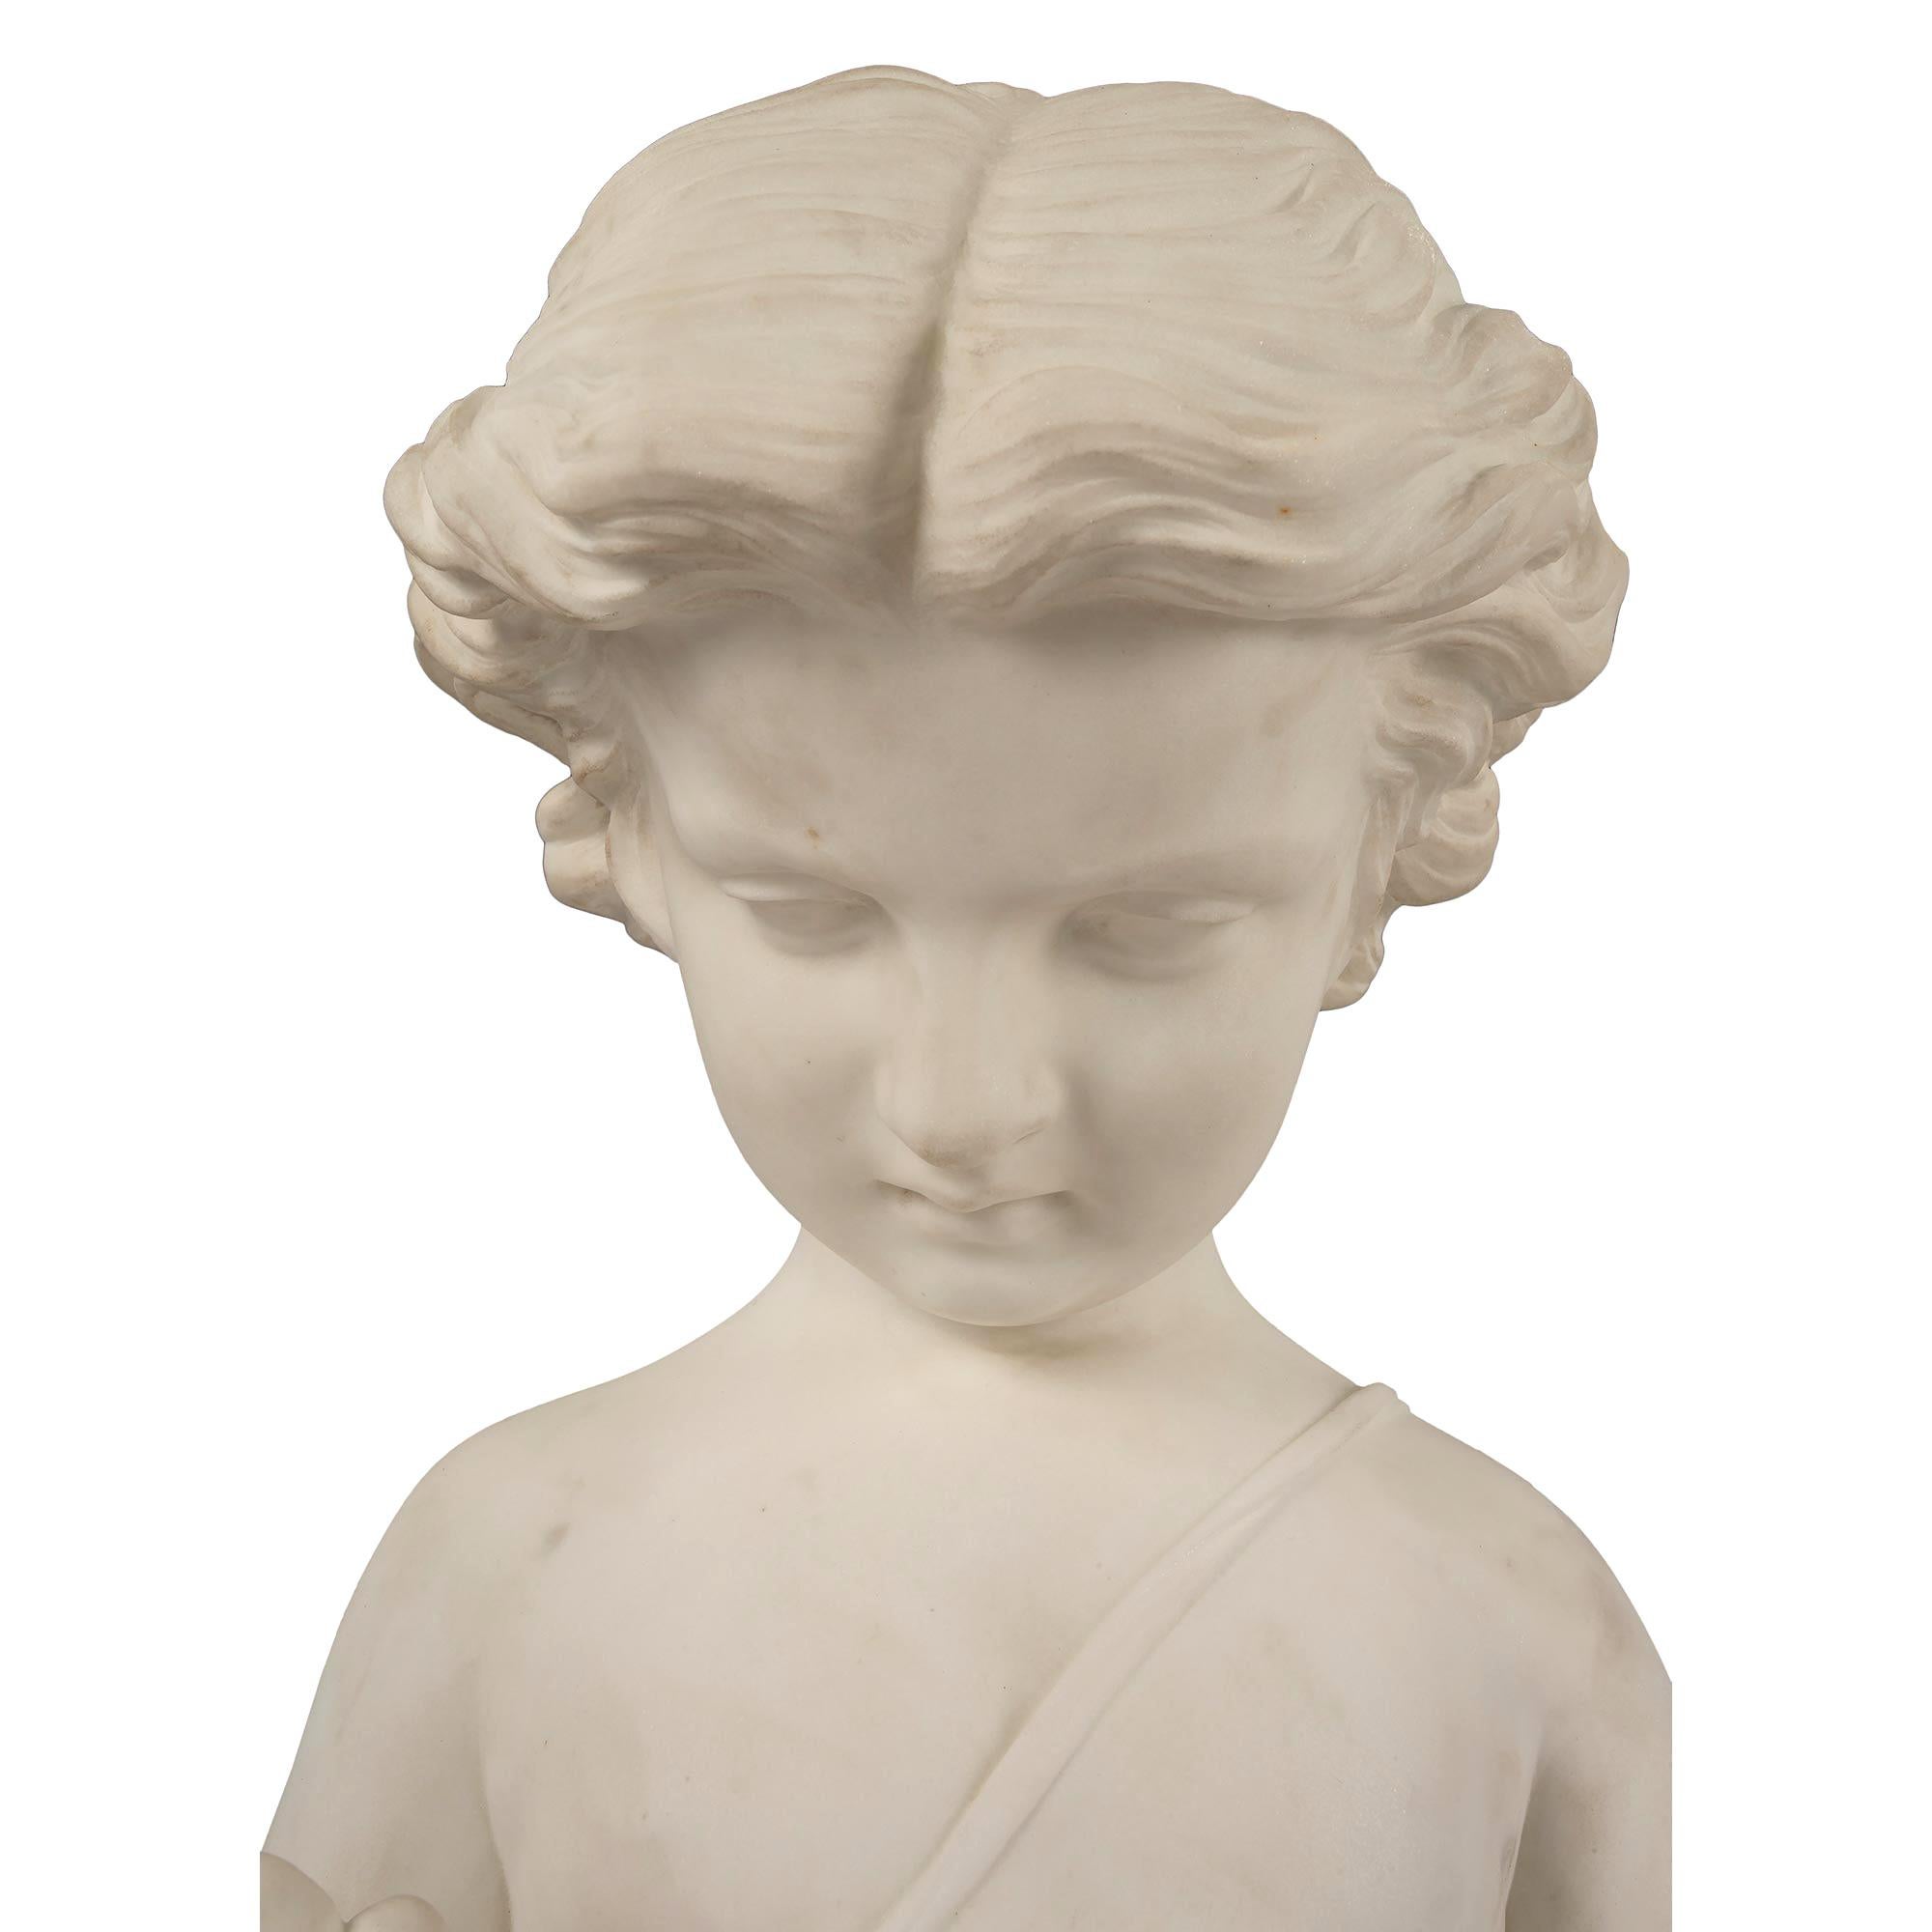 Italian 19th Century White Carrara Marble Statue of a Young Boy For Sale 4